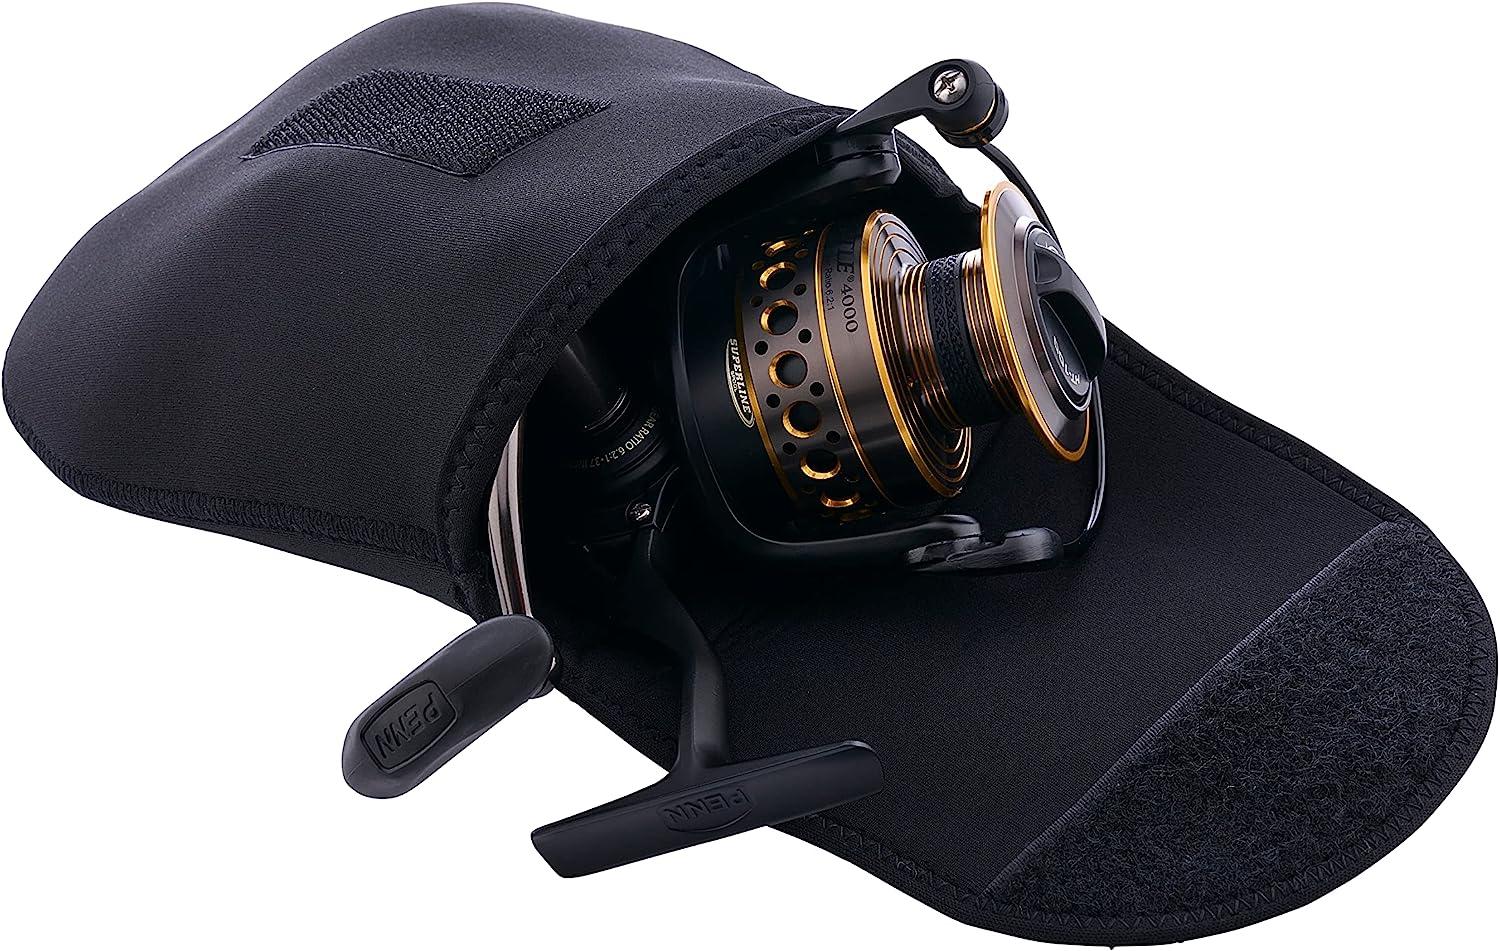 PENN Battle Spinning Reel Kit, Size 4000, Includes Reel Cover and